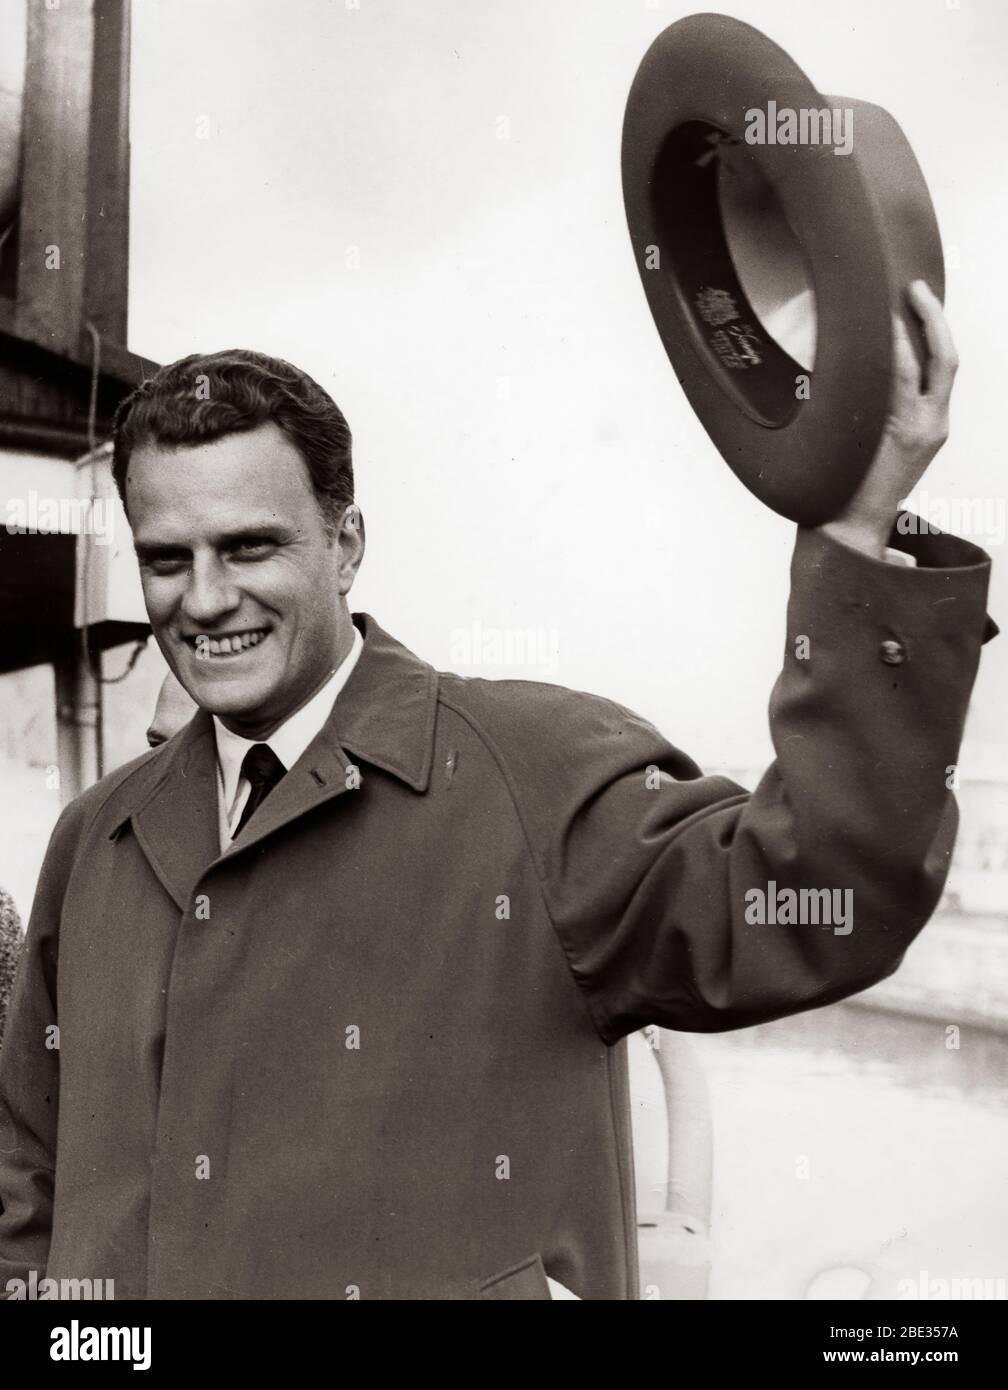 Oct. 2, 1960 - London, England, U.K. - BILLY GRAHAM, born William Franklin Graham, Jr., is an evangelical Christian reverend and evangelist. He gained fame due to his sermons being broadcast on the radio and television. PICTURED: Billy Graham at the airport. Stock Photo